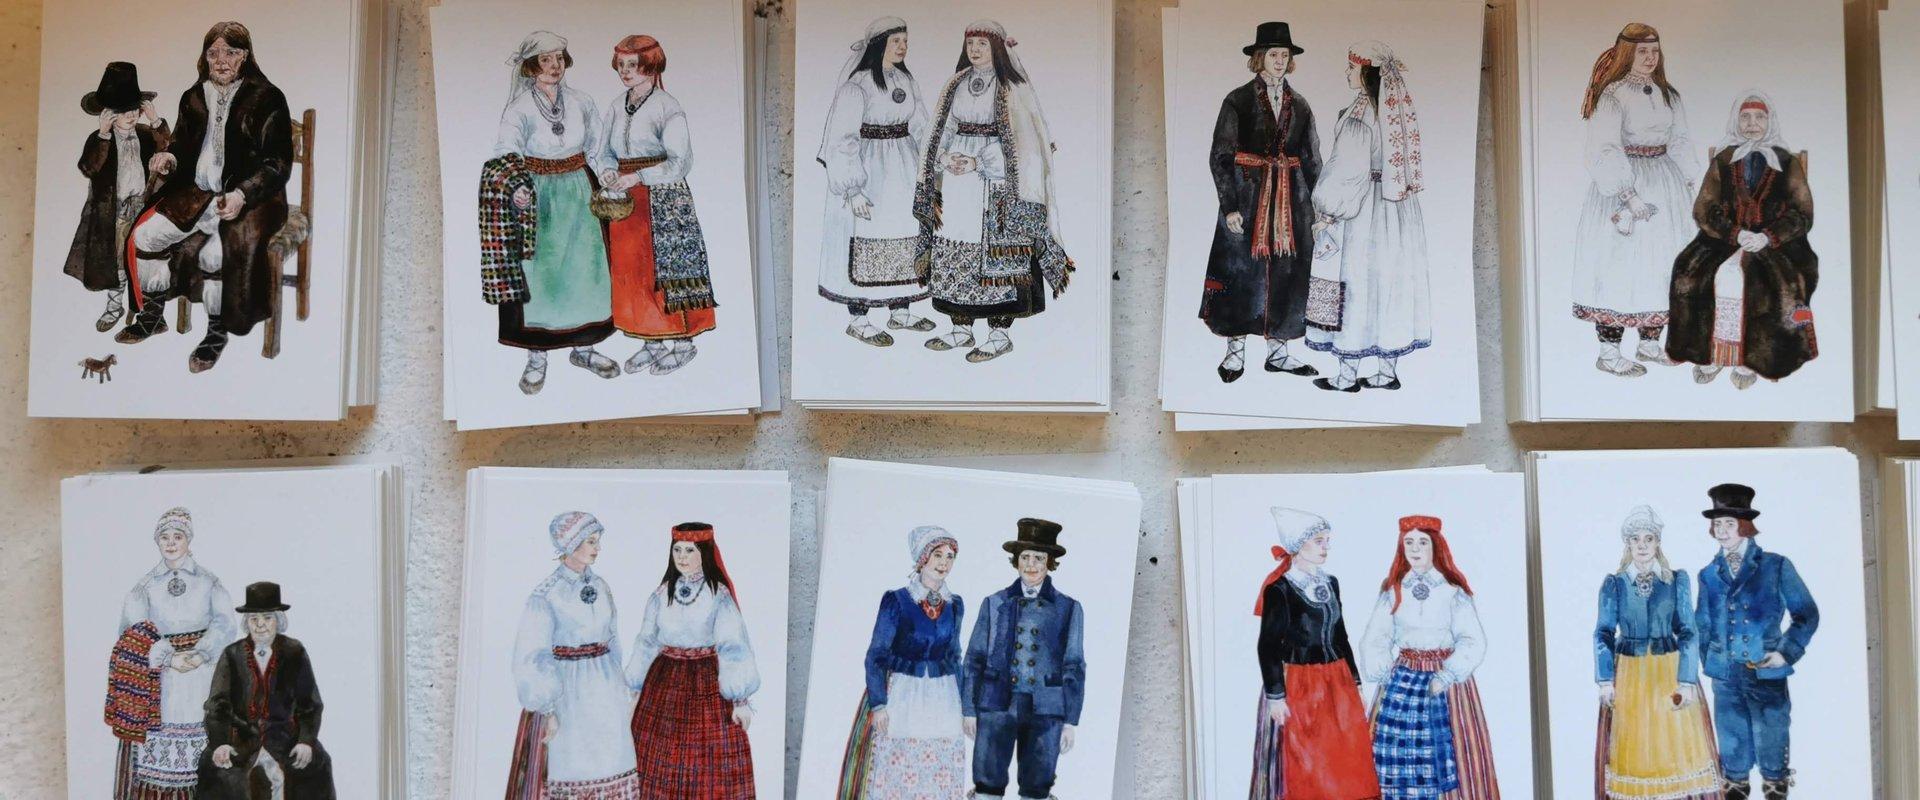 Overview of Estonian folk clothes at the Heimtali Museum